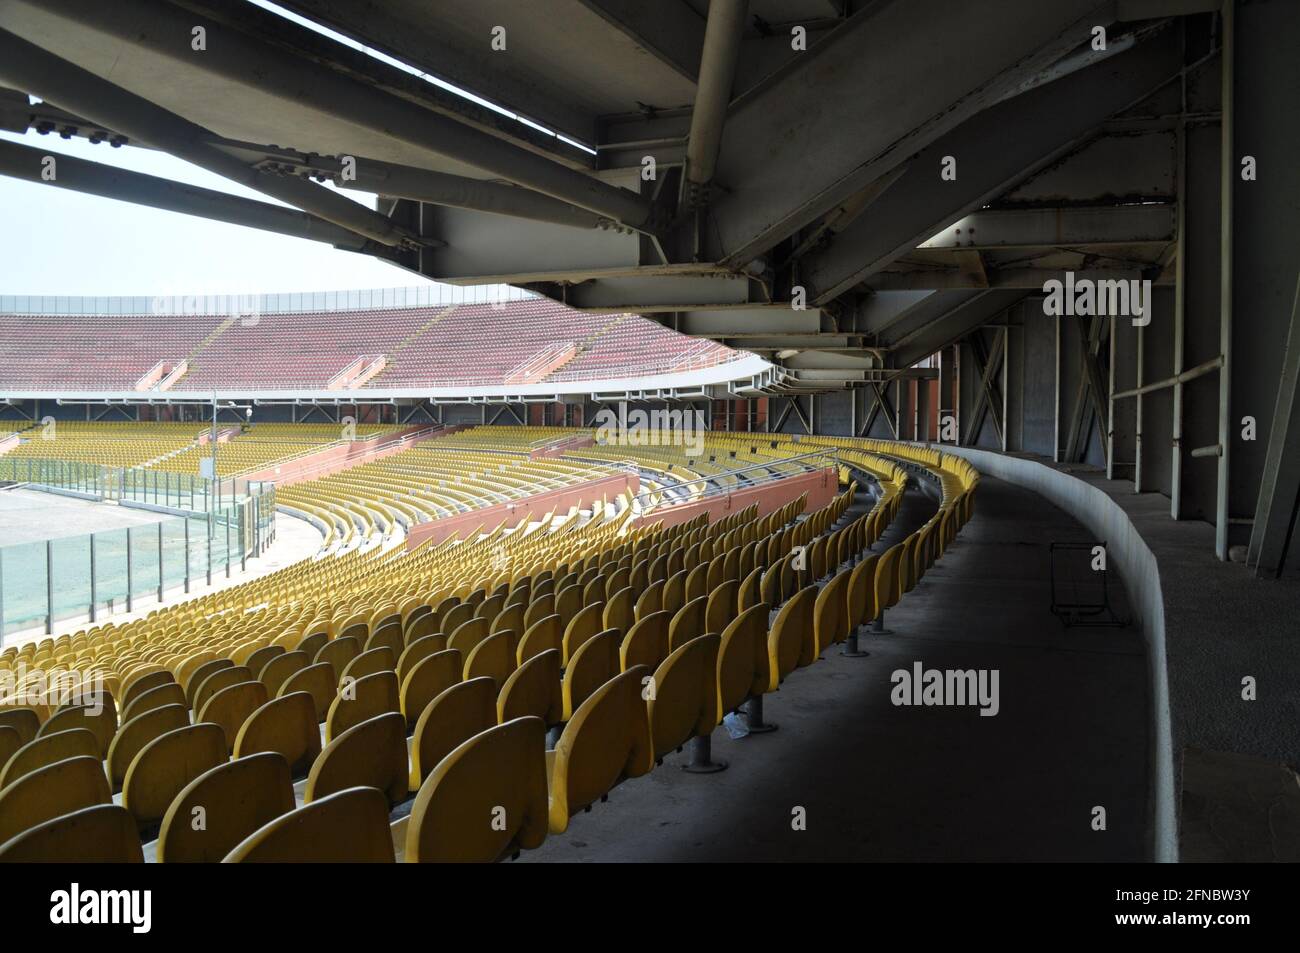 The Accra Sports Stadium in the African city of Accra, Ghana. Stock Photo